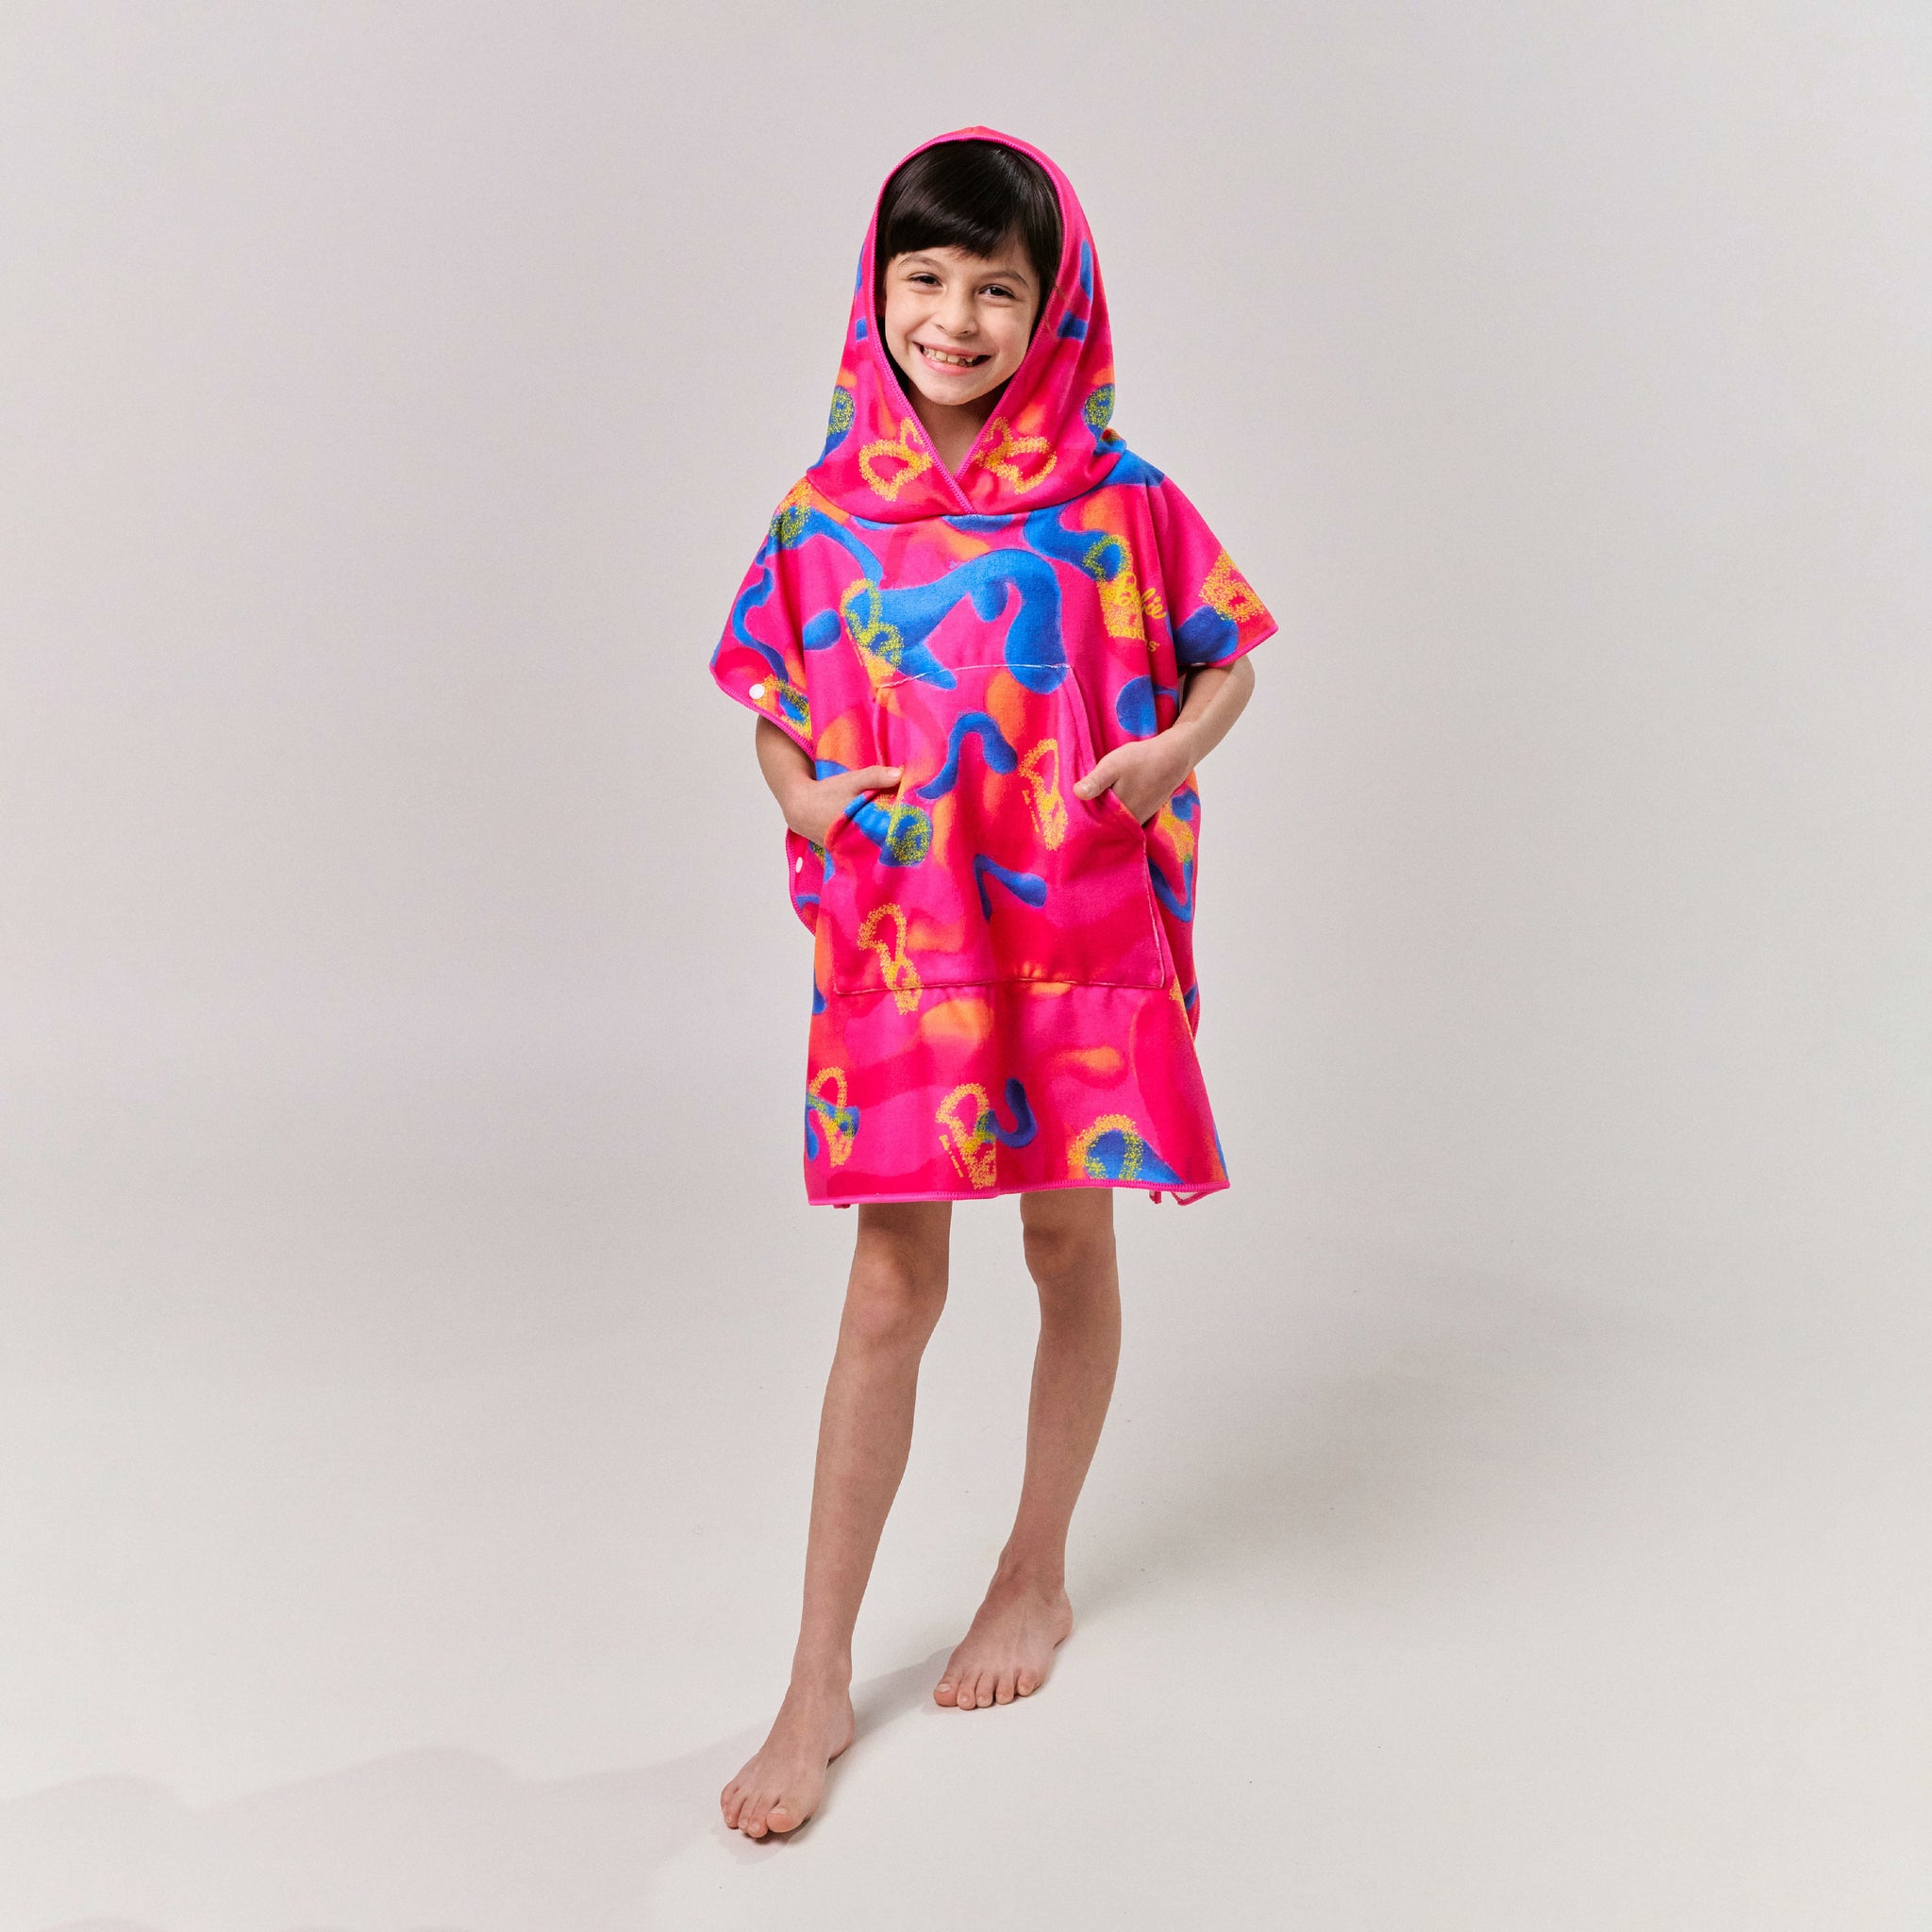 PONCHO KIDS TOWEL MELODY IN HOT PINK